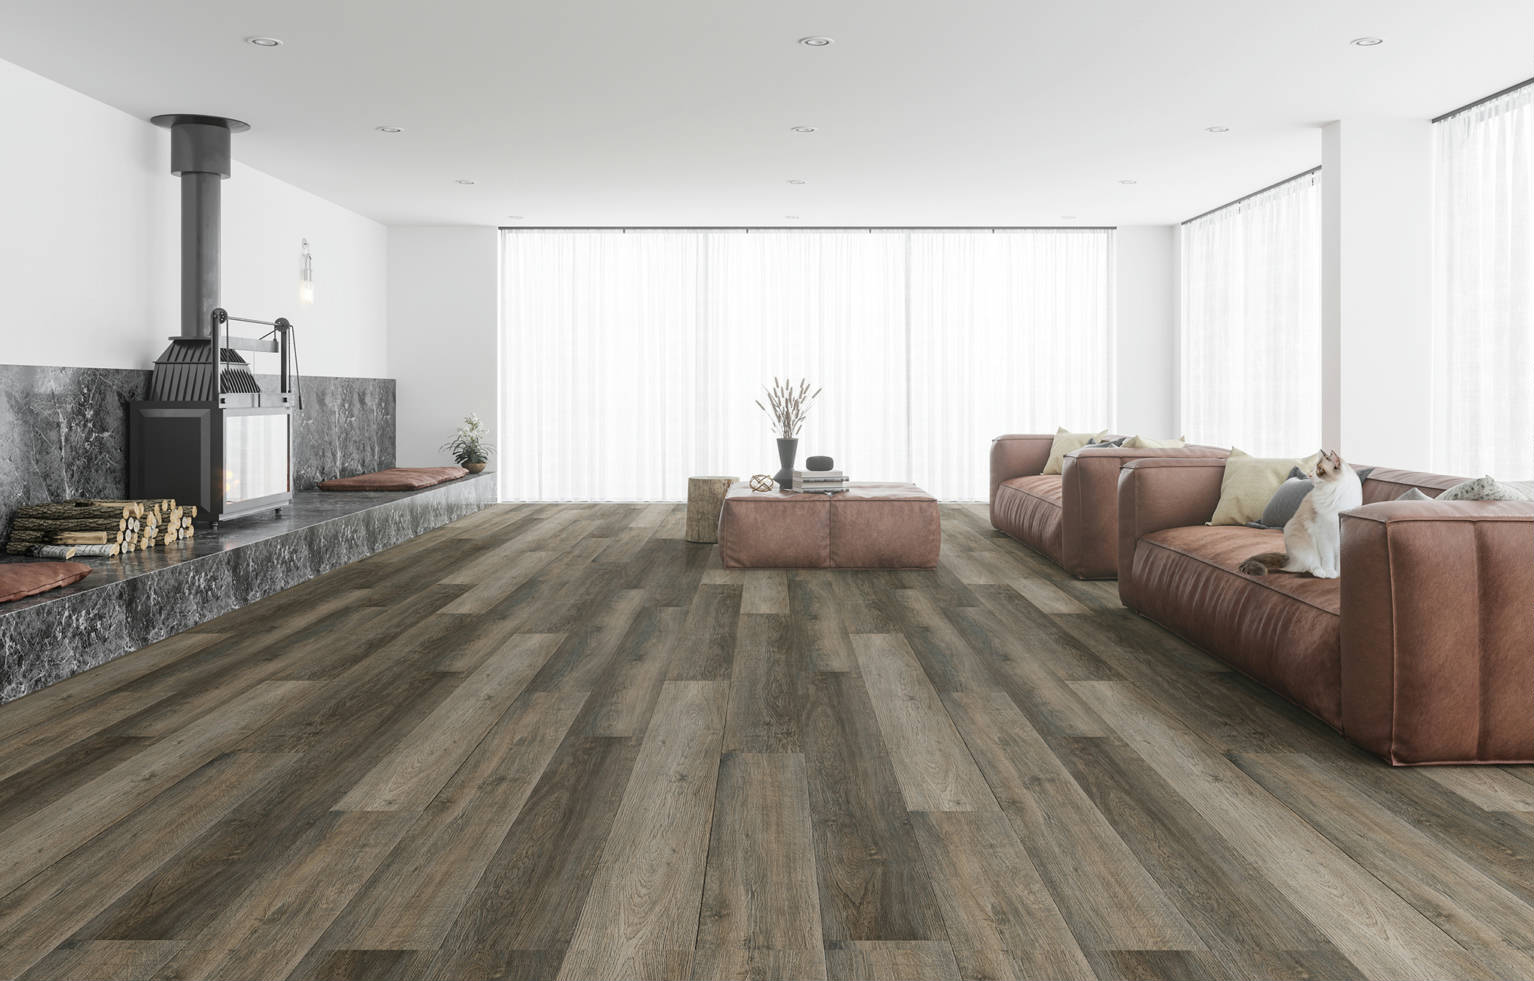 Timber Ridge Gold 12 3 | Qualis Ceramica | Luxury Tile and Vinyl at affordable prices